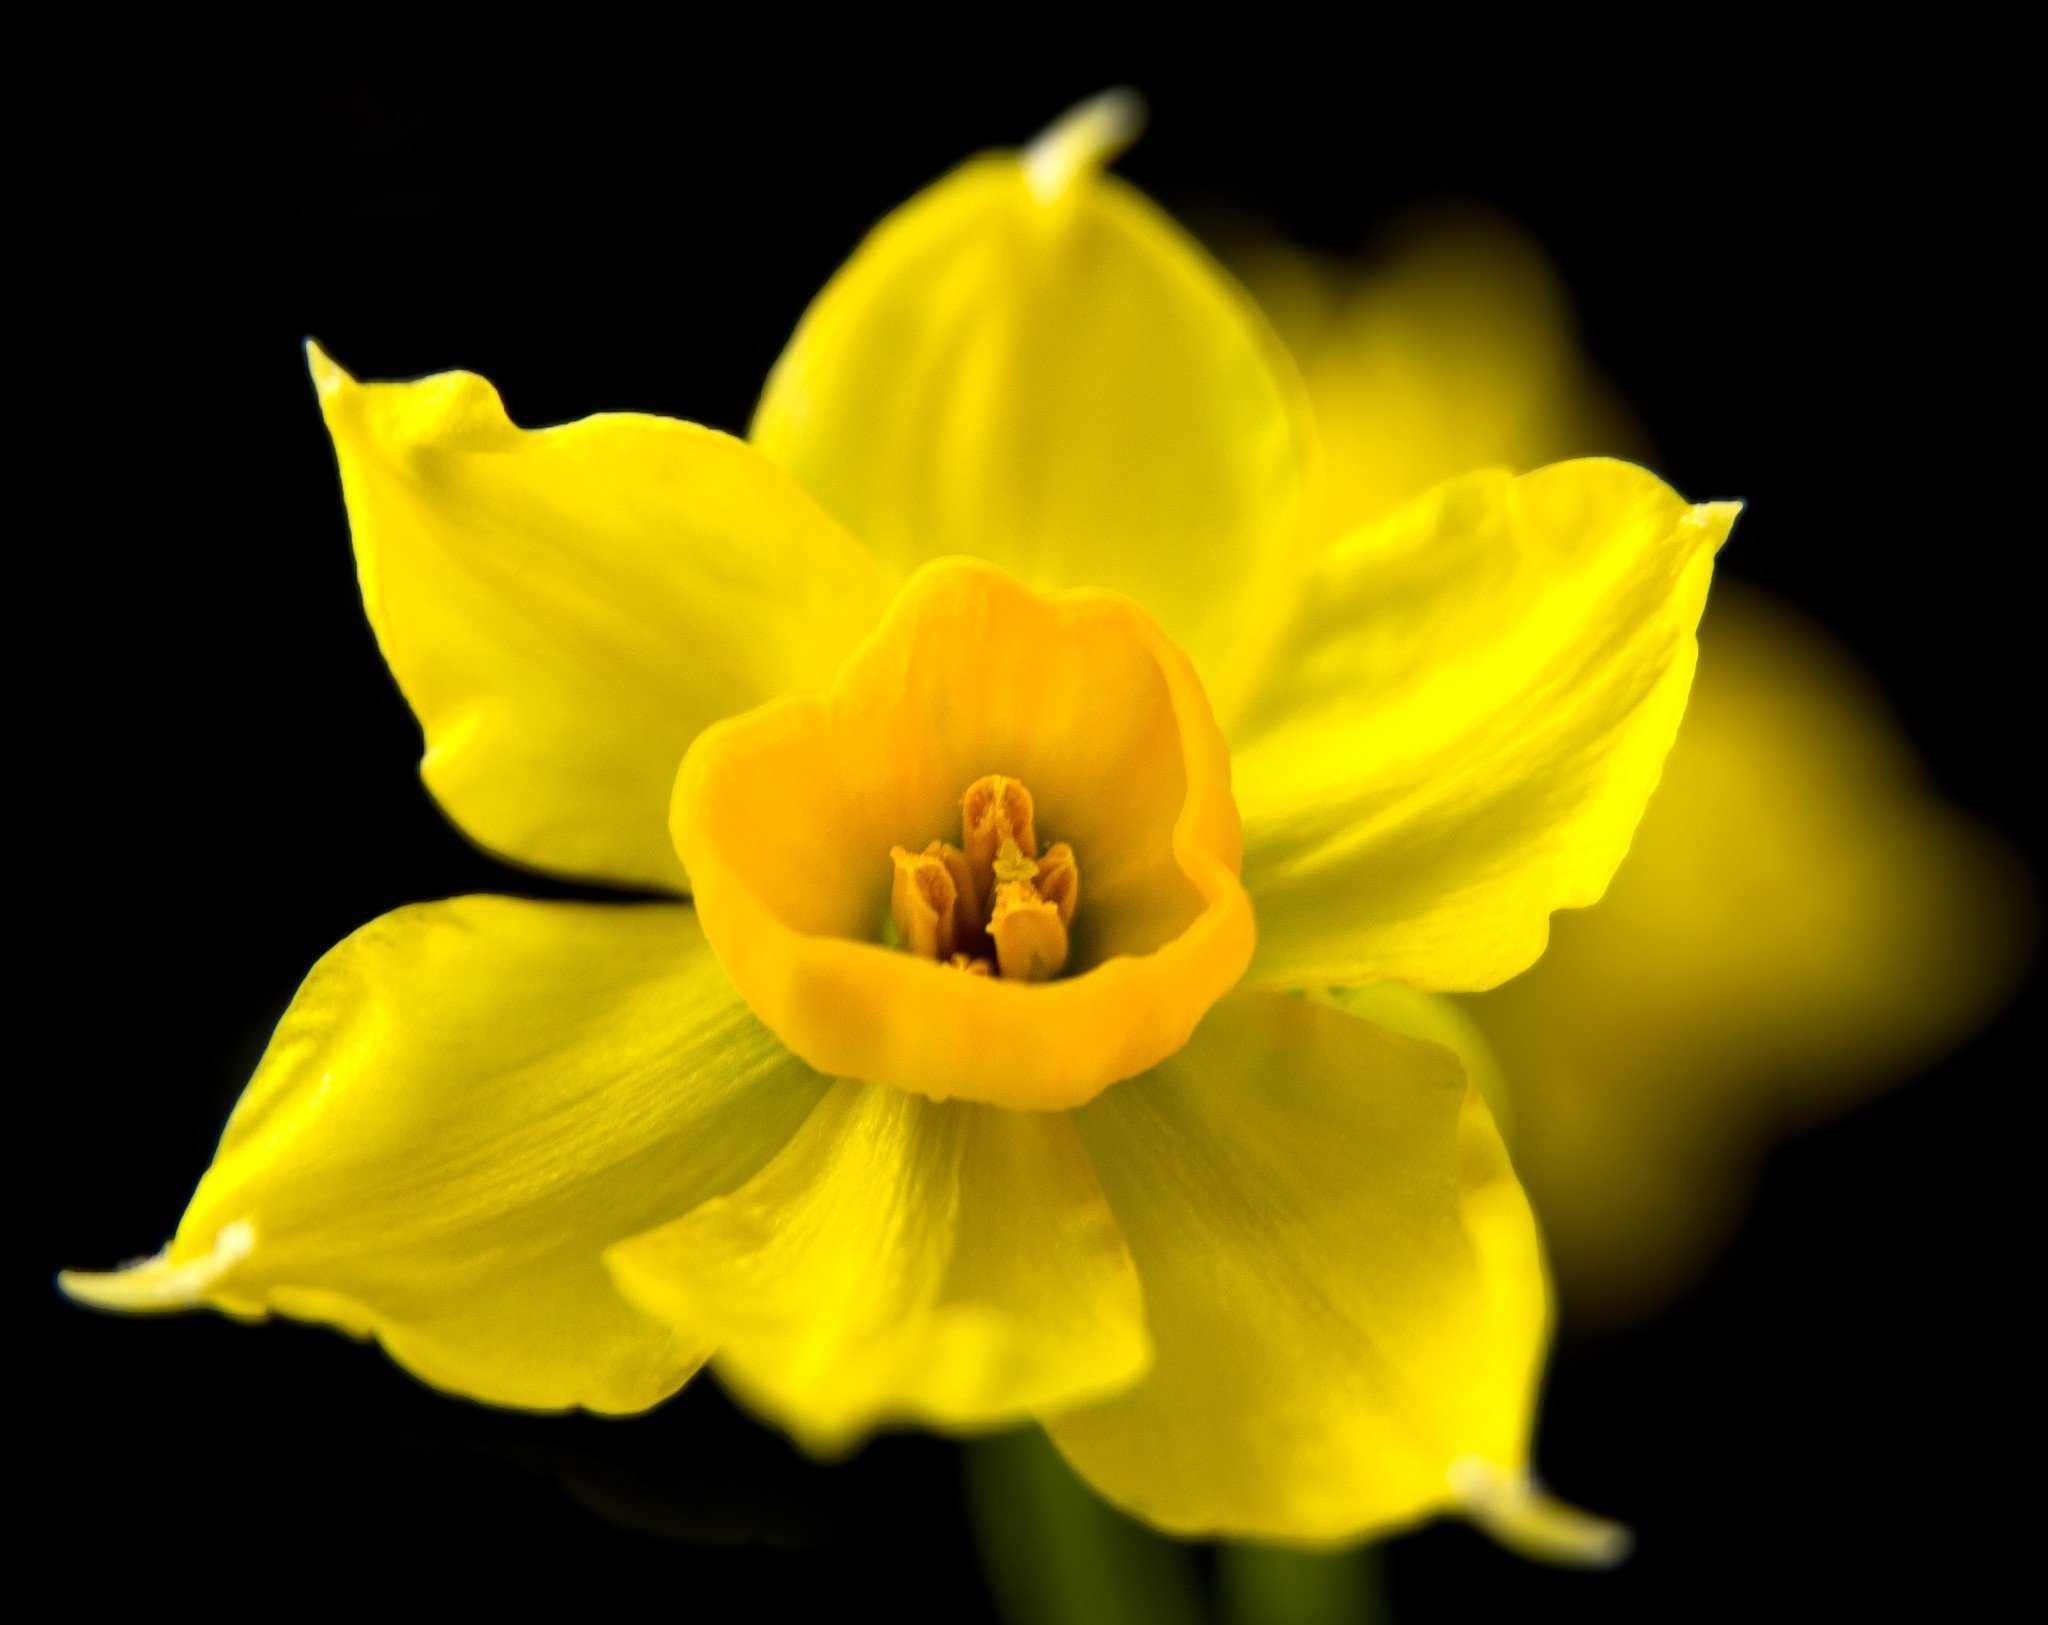 Yellow Flower Black Background Wallpaper Questions